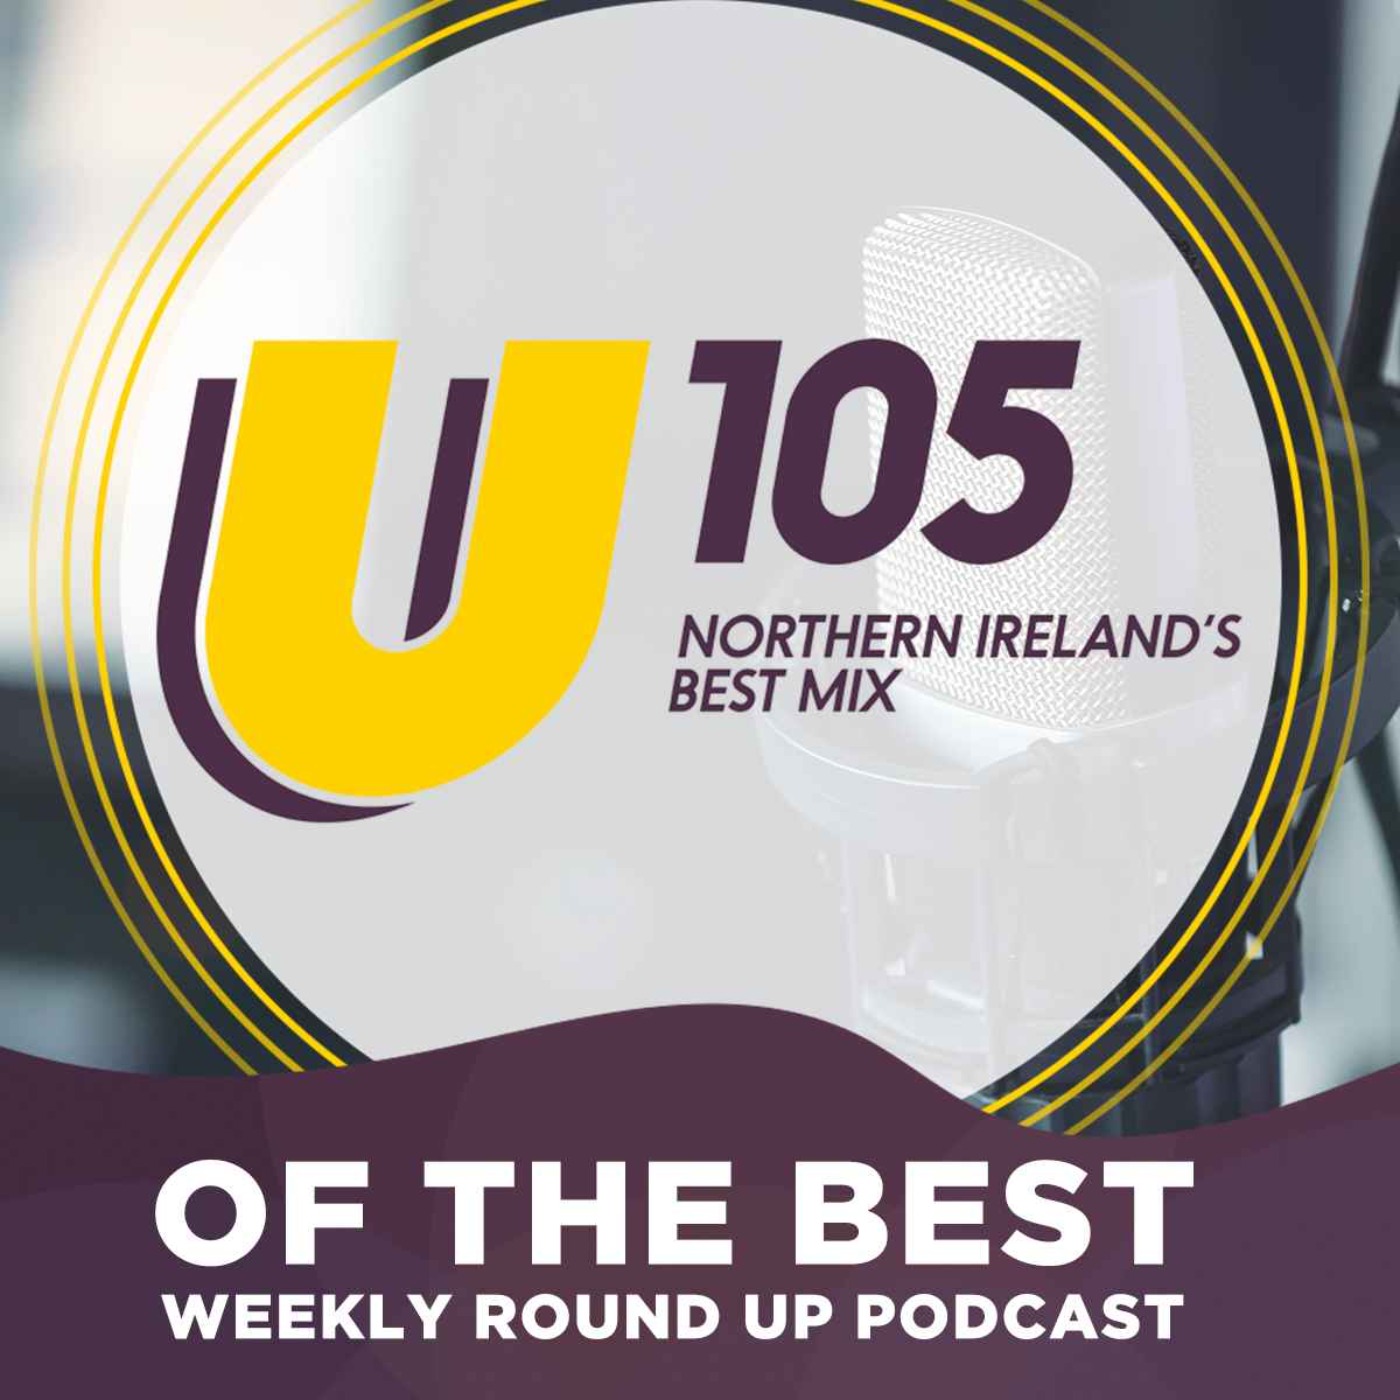 cover art for 5050: LISTEN¦ It's Friday...you know that that means! The legendary Dionne Warwick graces this week's U105 of the Best, alongside our regular dose of quizzing, banter, pop culture and more from Northern Ireland's Best Mix!